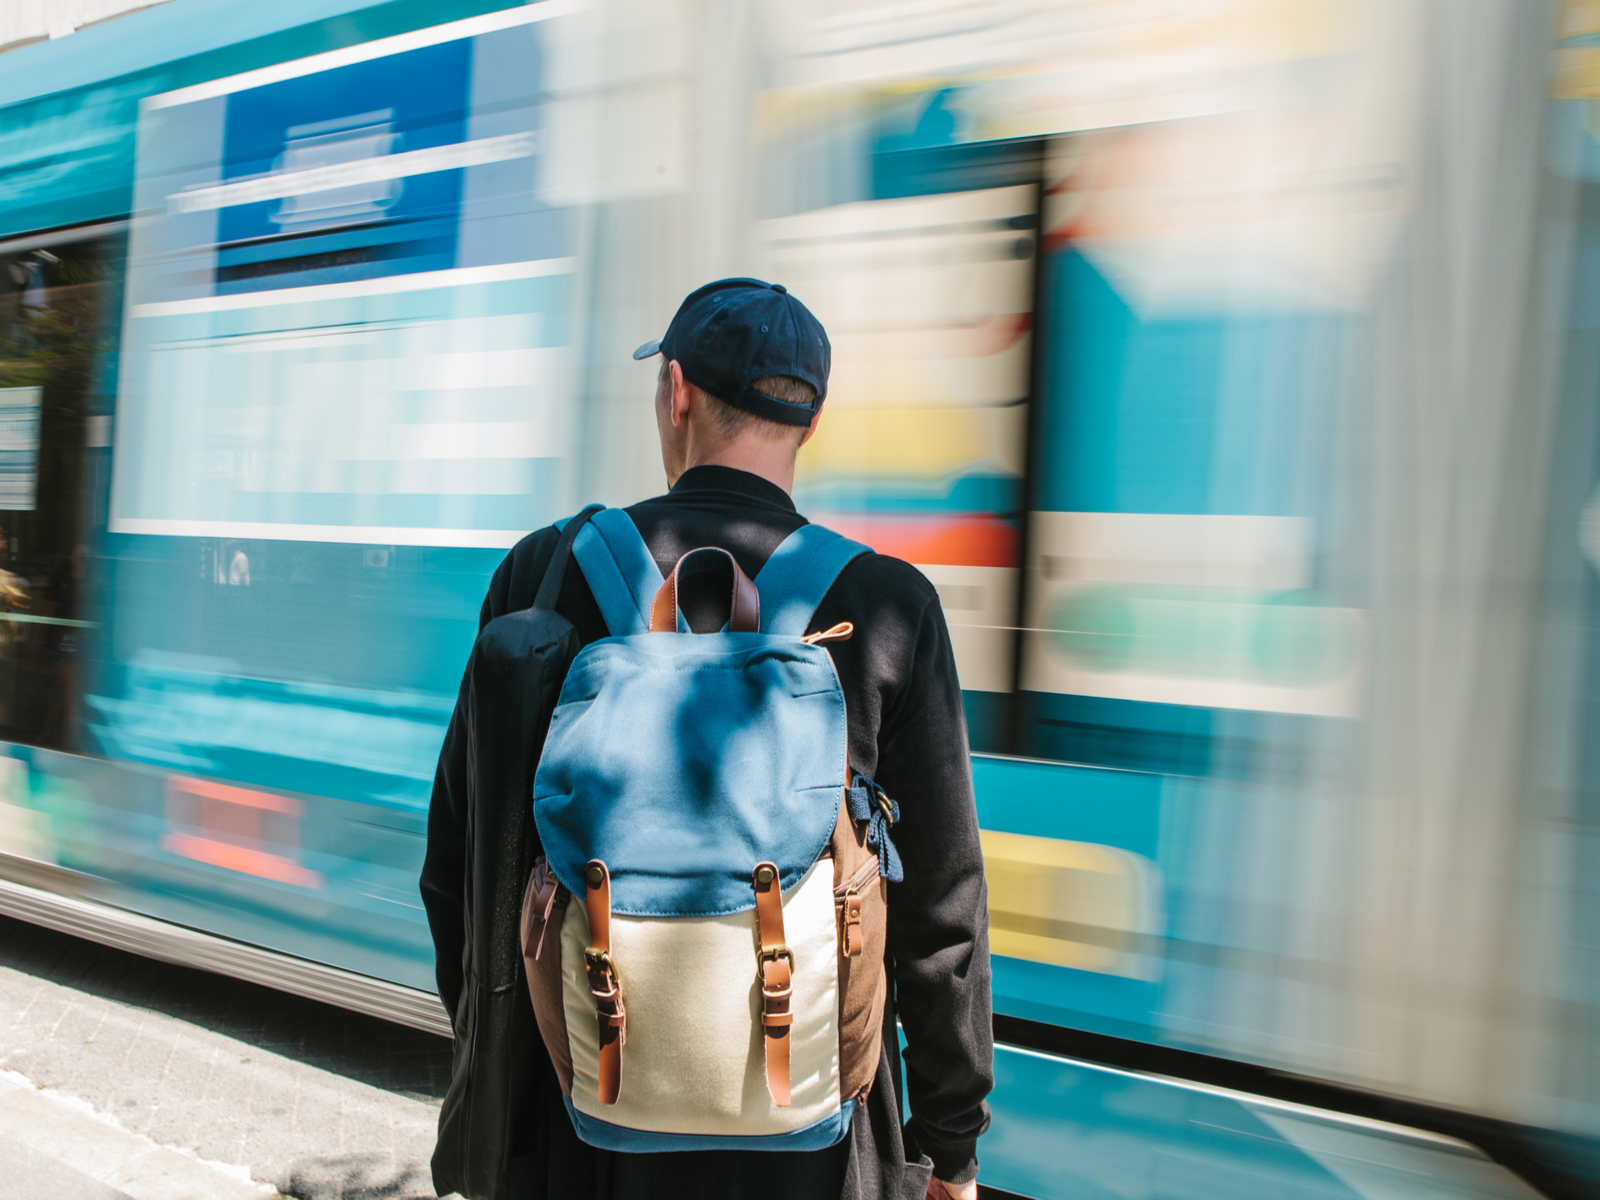 For a piece on the best commuter backpacks, a guy wears a pack while a train speeds by in a blur